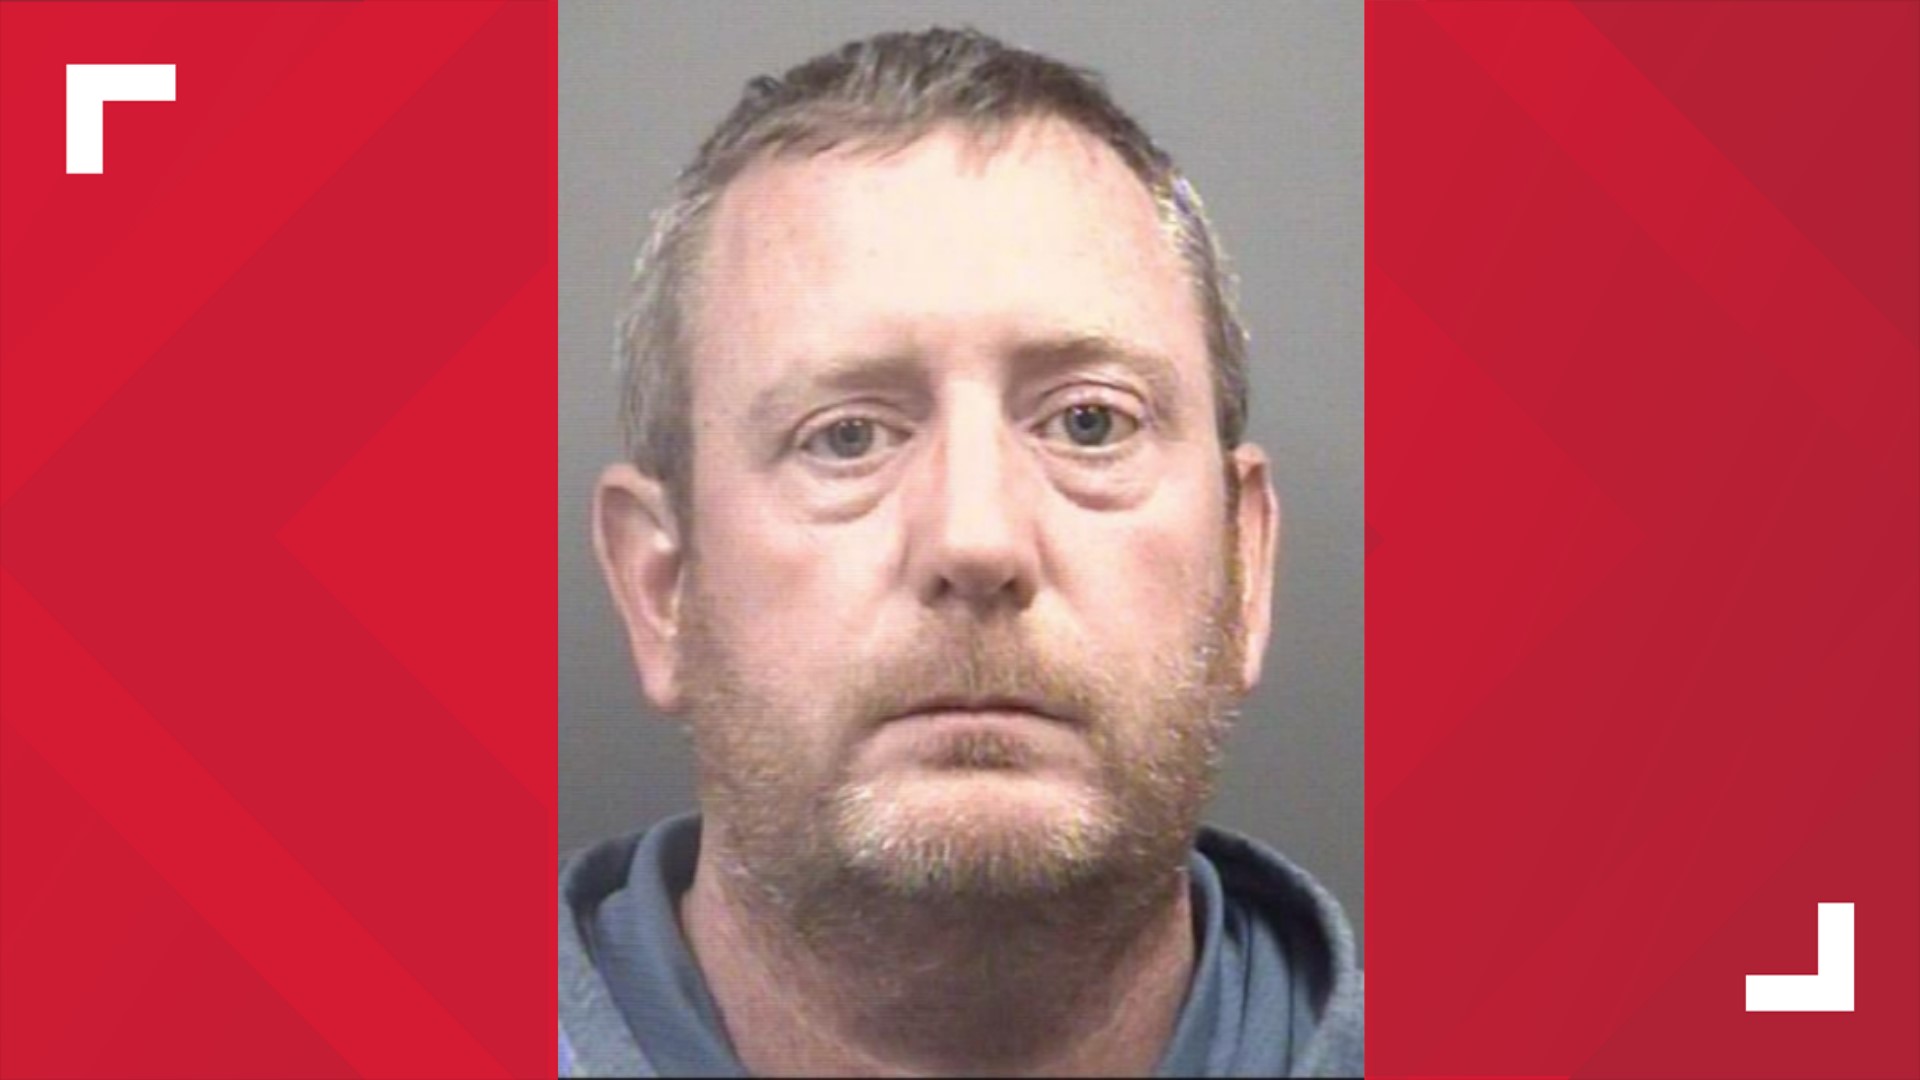 Authorities say Stacy Lee Austin admitted to the sexual acts and said he was worried about losing his job as a Chick-fil-A franchise owner.